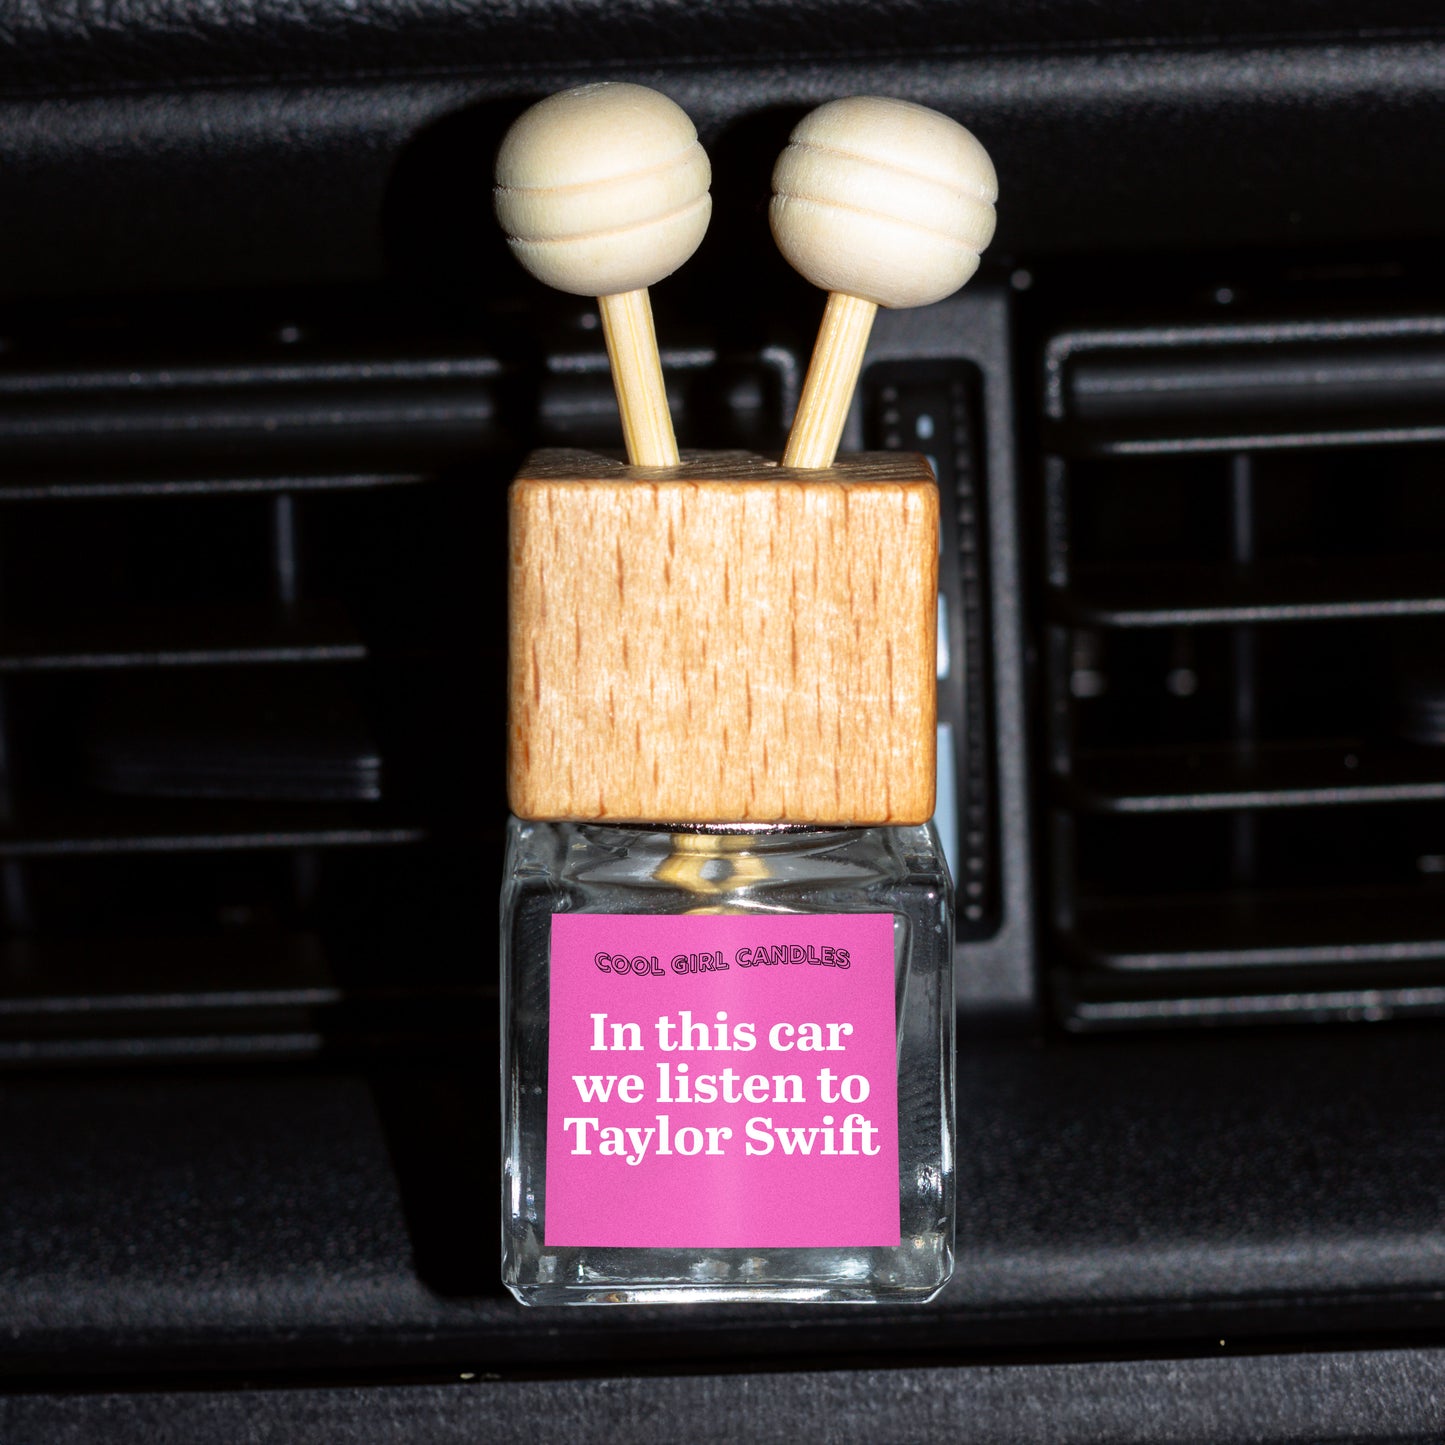 Taylor Swift car freshener cool girl candles gift for Swifties 